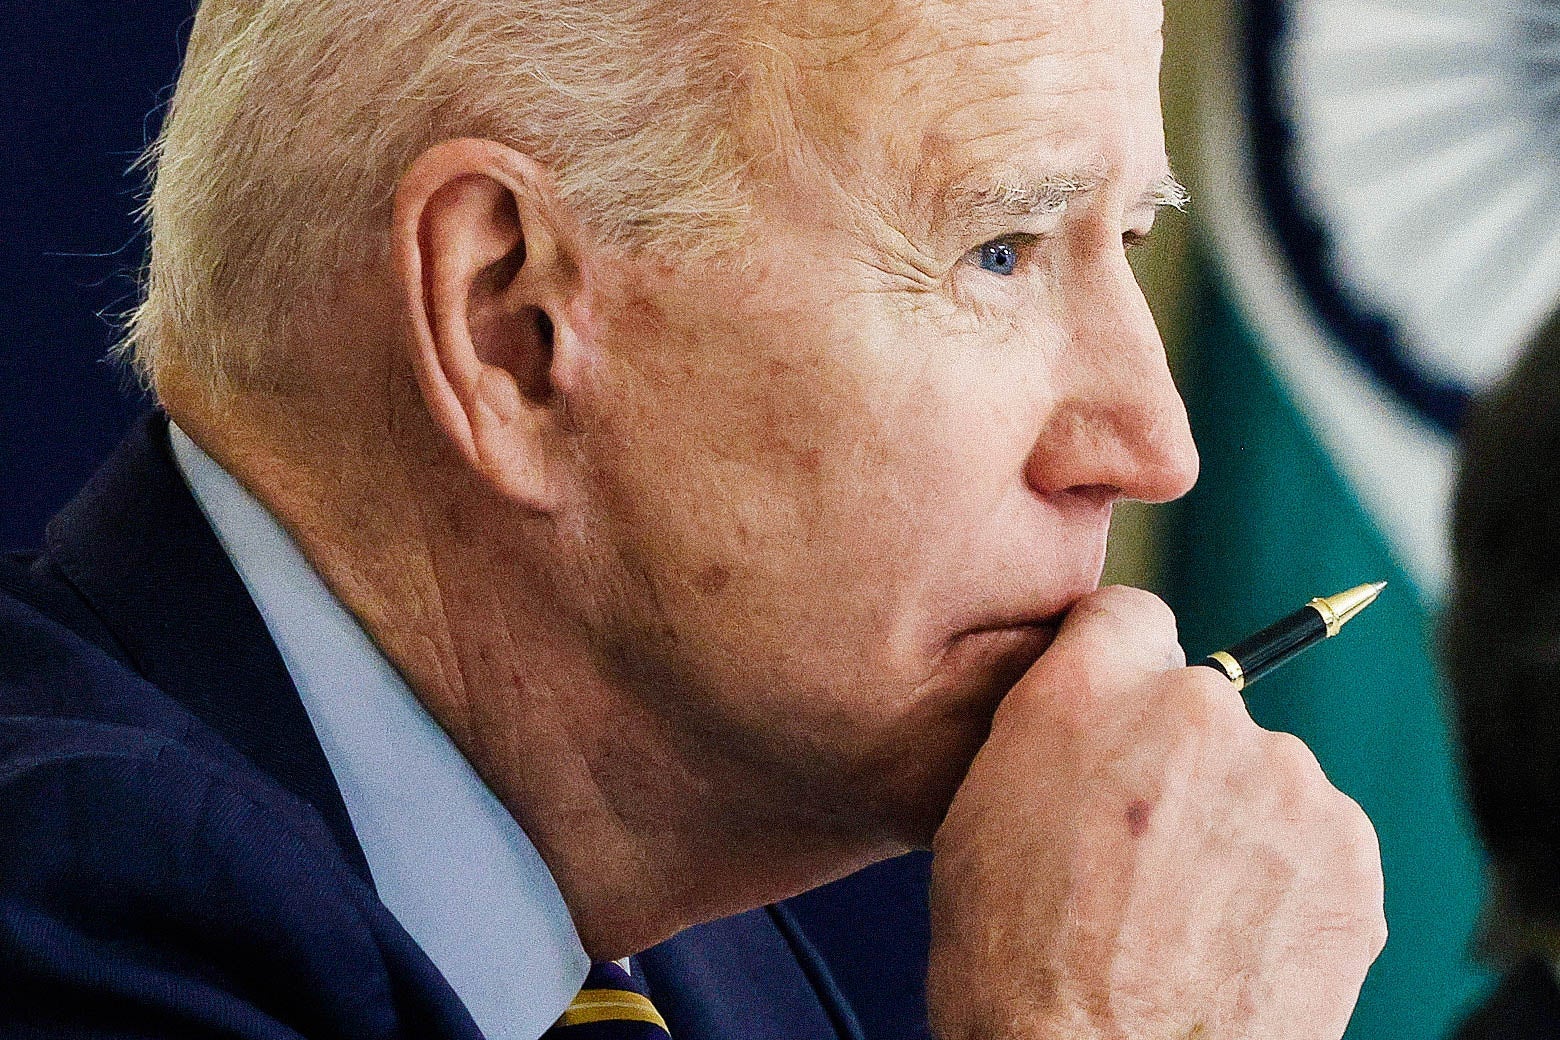 Joe Biden, in profile, holds his hand (with a pen in it) up to his chin.